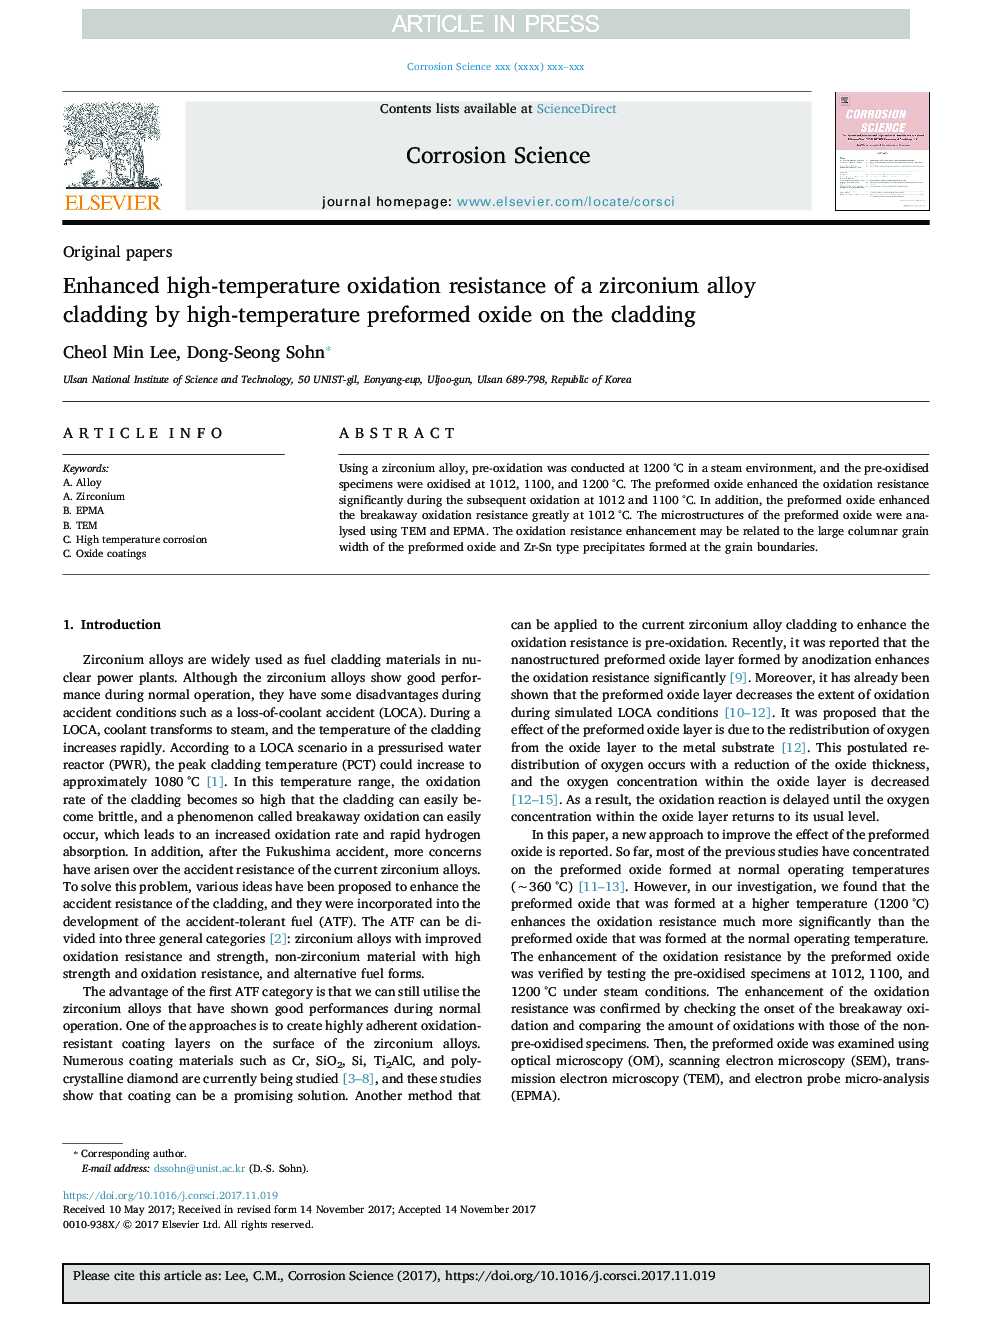 Enhanced high-temperature oxidation resistance of a zirconium alloy cladding by high-temperature preformed oxide on the cladding